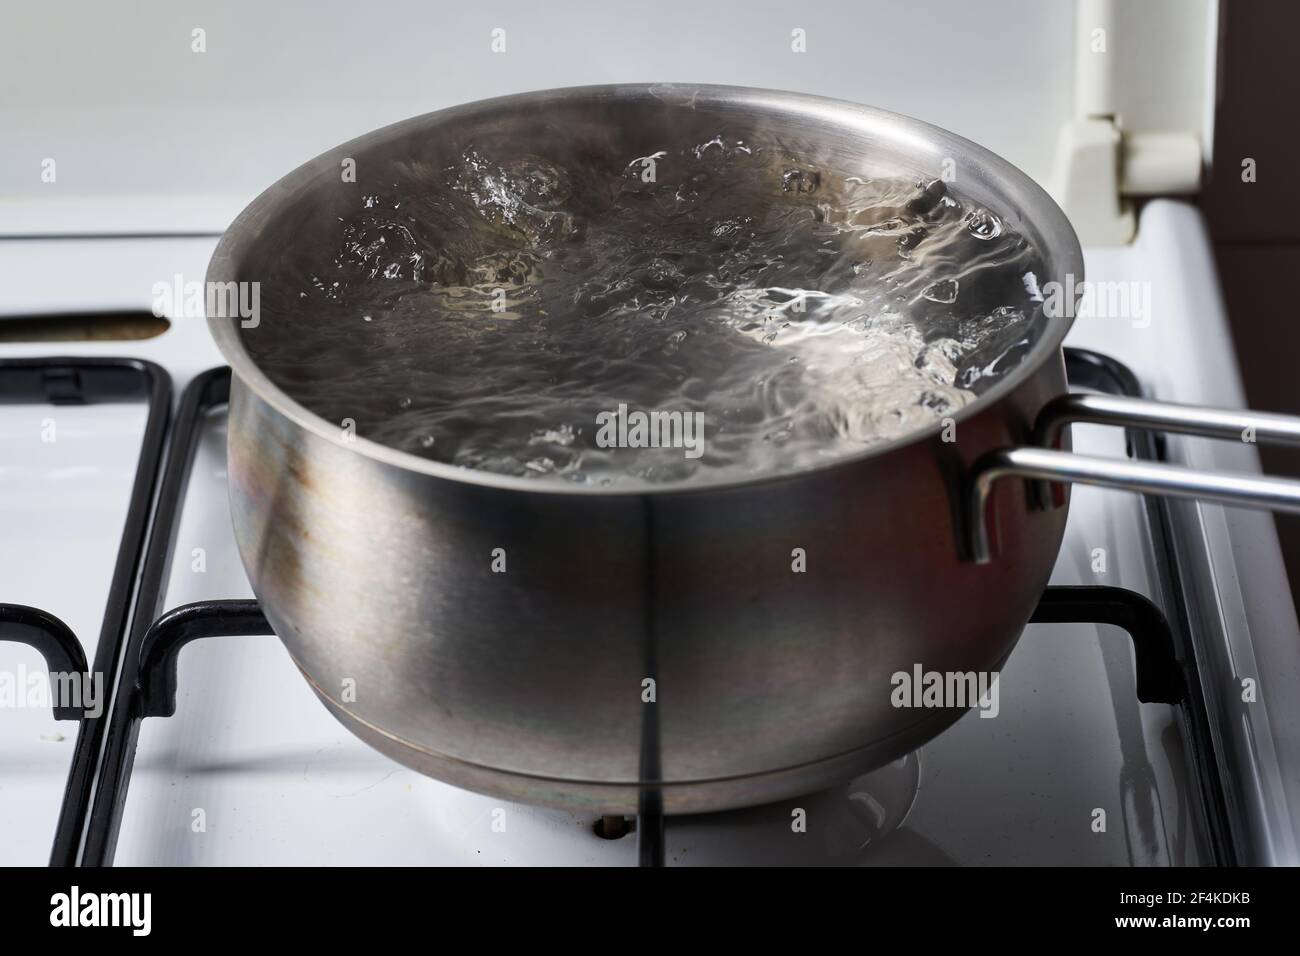 https://c8.alamy.com/comp/2F4KDKB/stainless-steel-pot-with-water-boiling-on-the-gas-stove-2F4KDKB.jpg